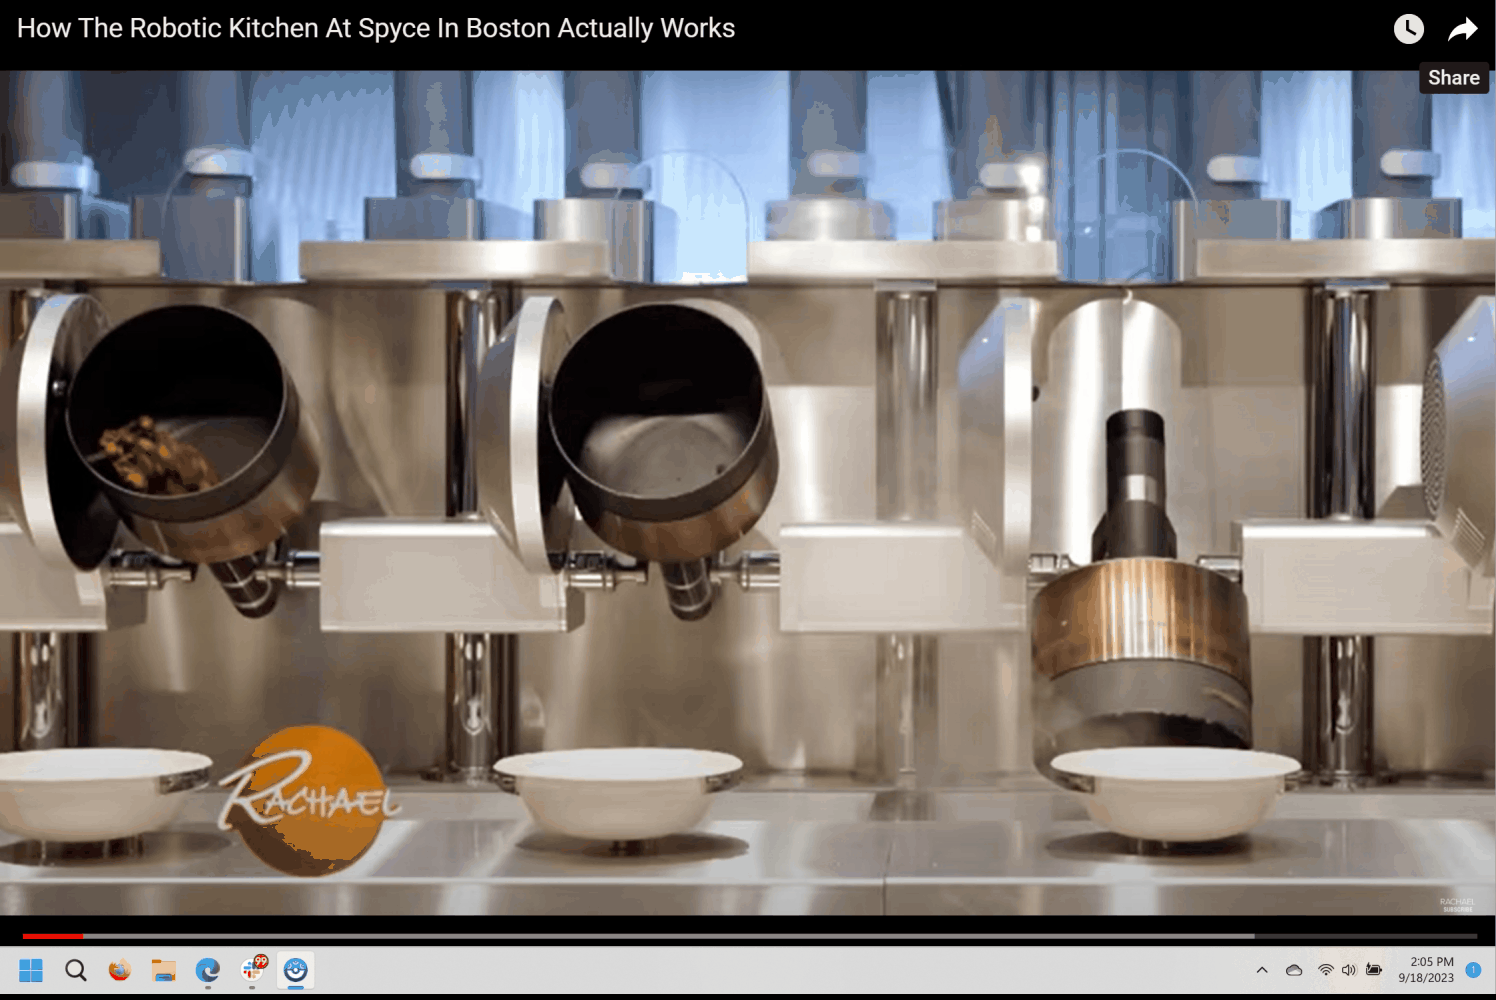 A GIF showing how Spyce's robot kitchen, the world's first robotic kitchen, works.